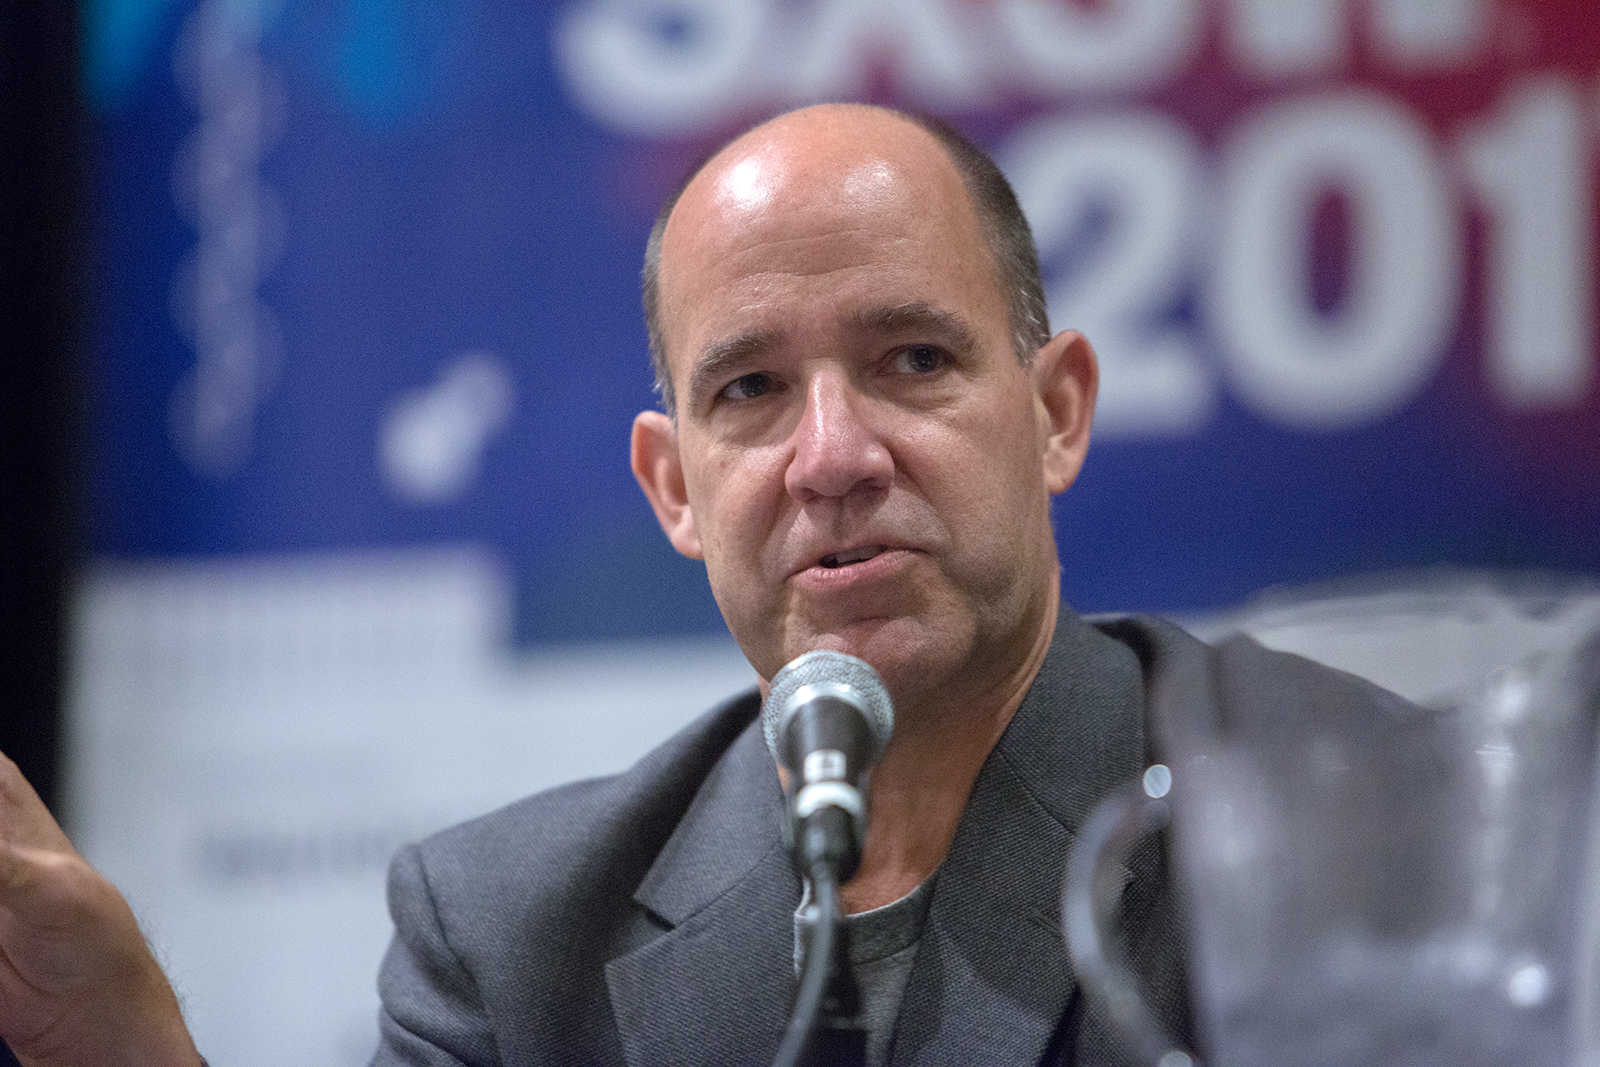 Matthew Dowd participated in a panel at South By Southwest in March 2017. Photo courtesy of Wikipedia/Creative Commons